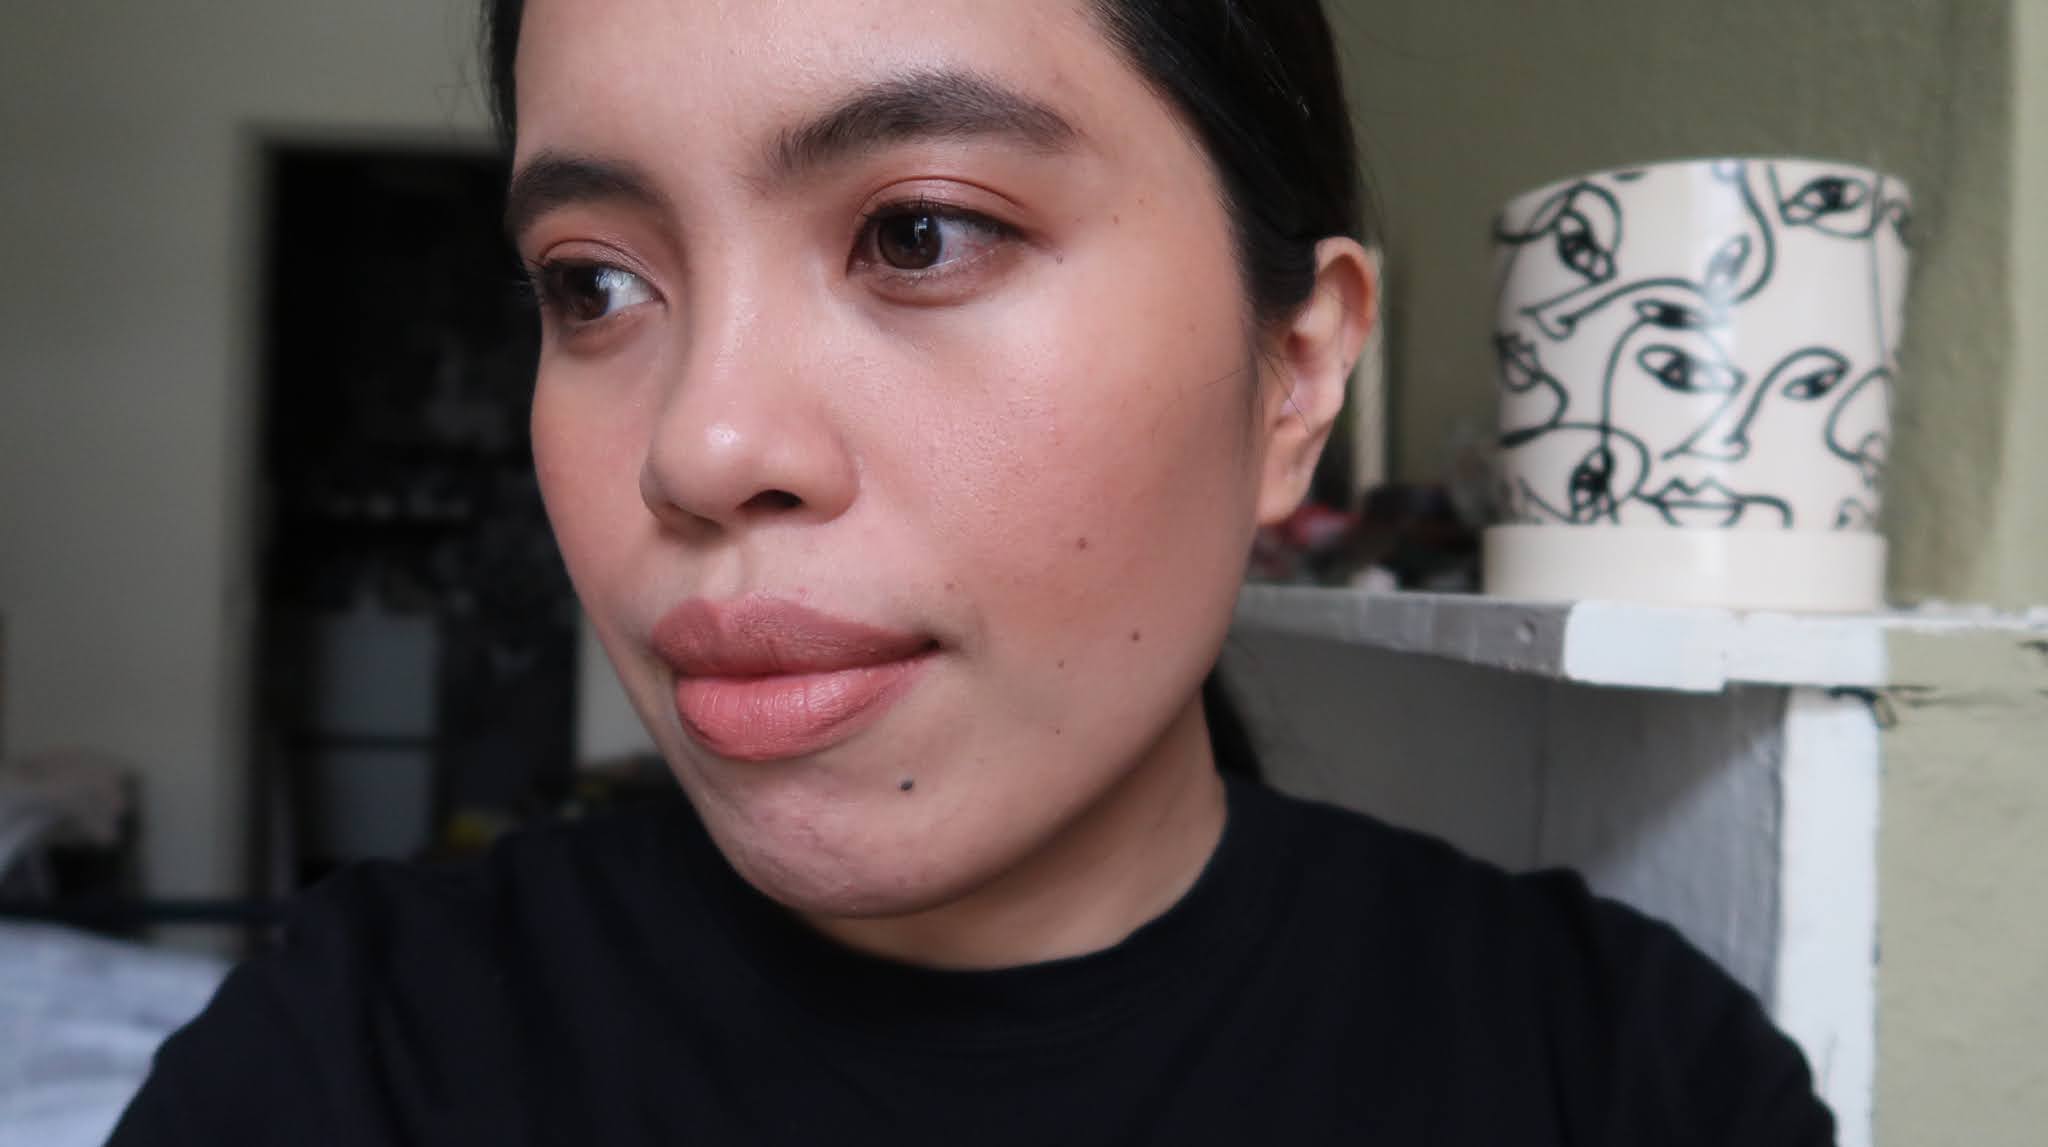 Cover fx Monochromatic Blush Duo & Monochromatic Bronzer Duo Review and  Swatches — Survivorpeach